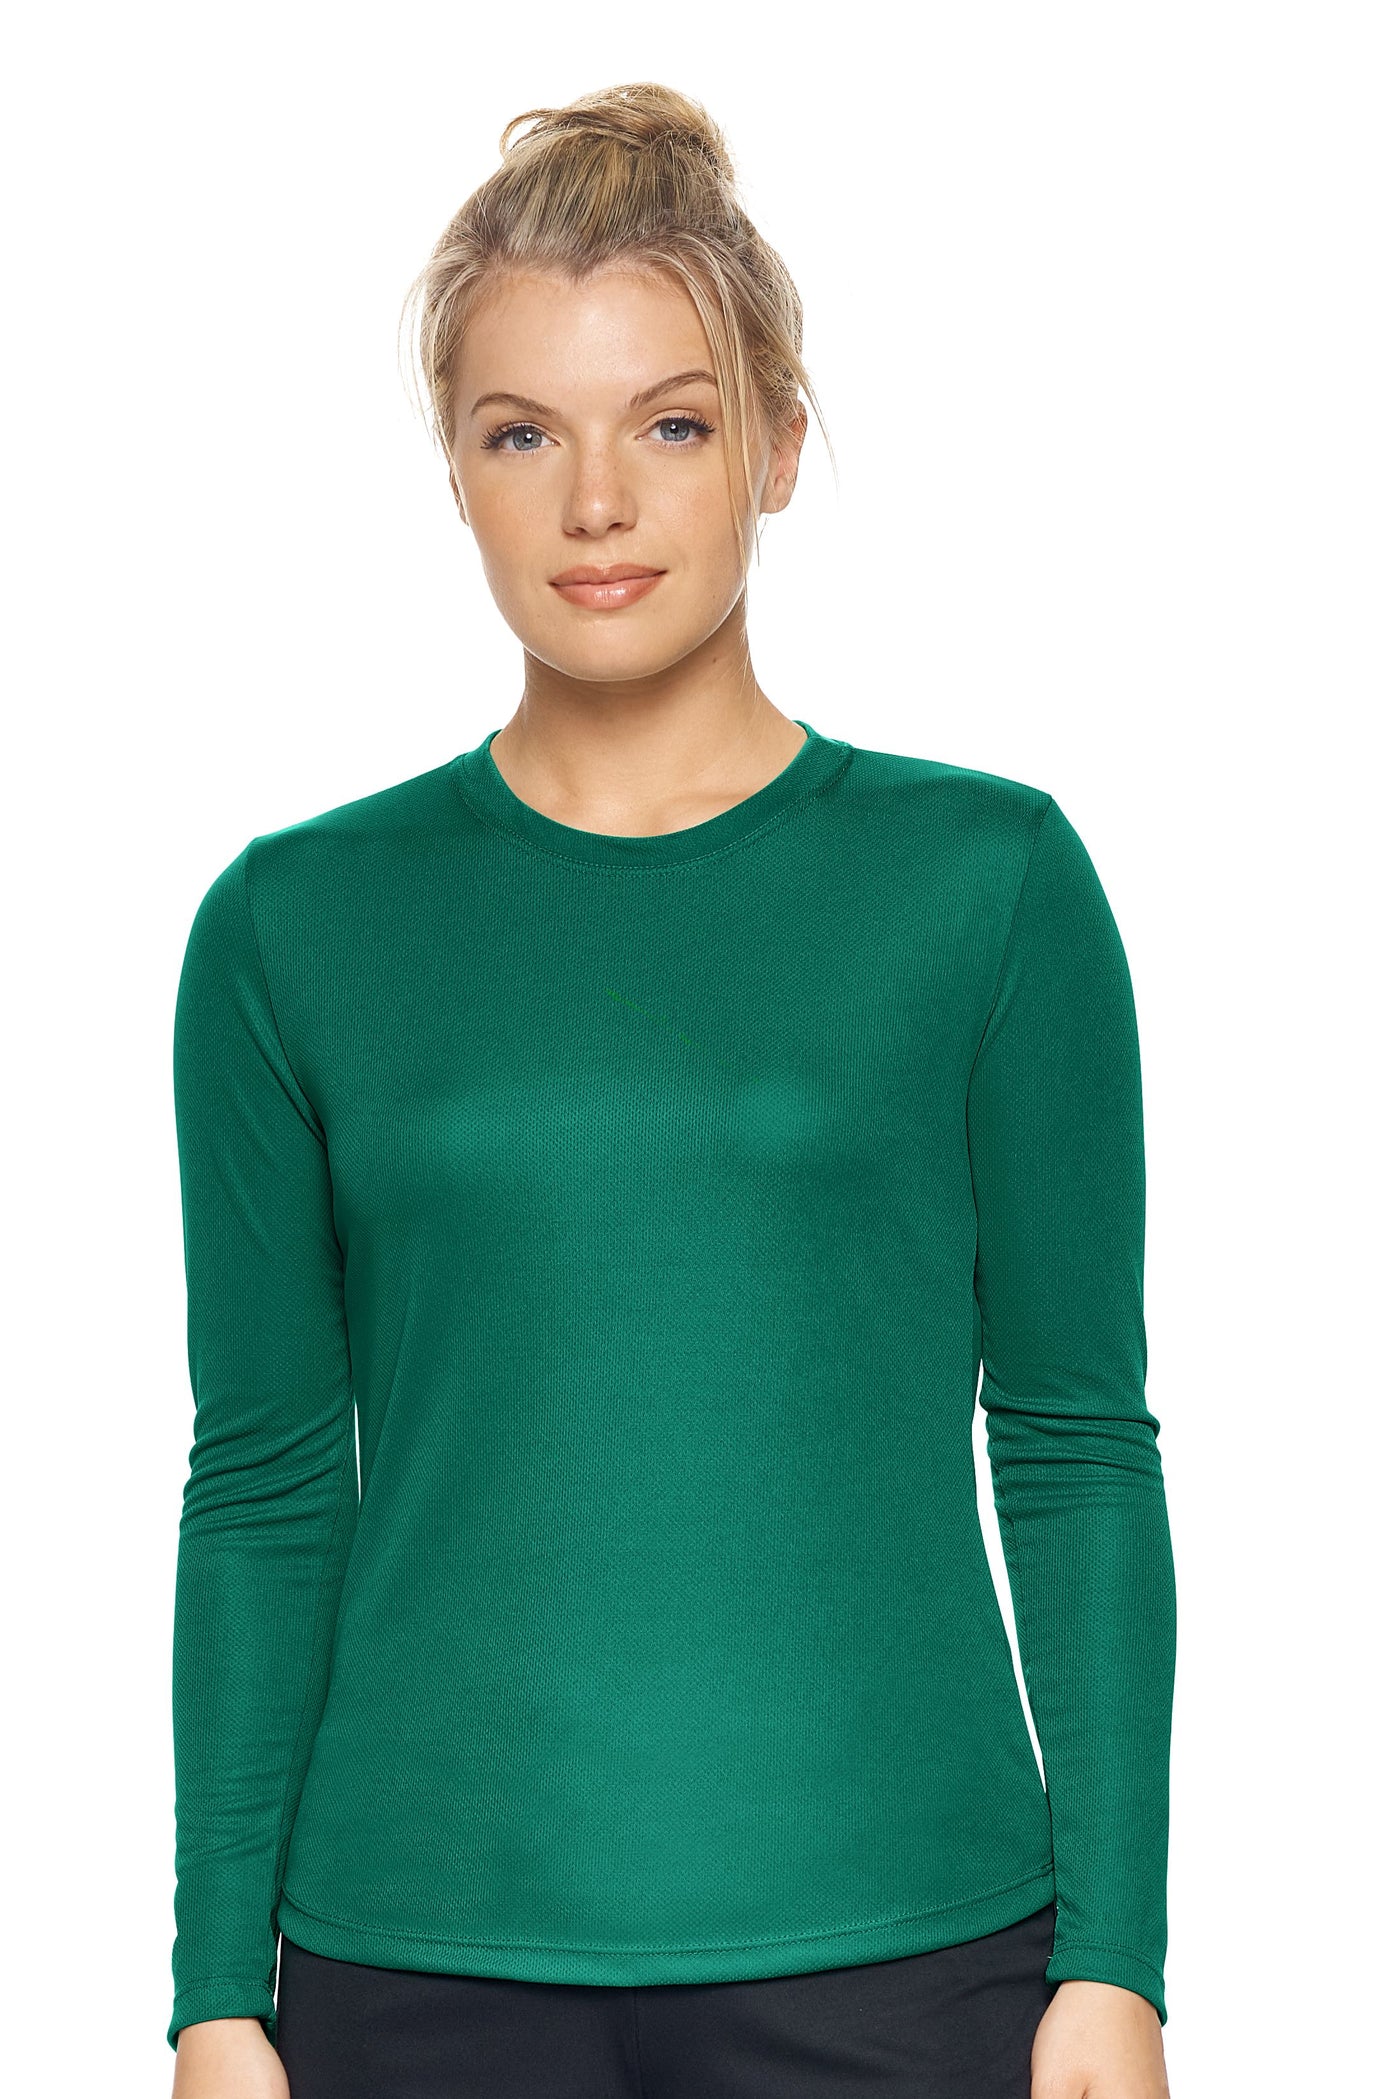 Expert Brand Retail Women's Long Sleeve Crewneck Tec Tee Made in USA Oxymesh forest green#color_forest-green